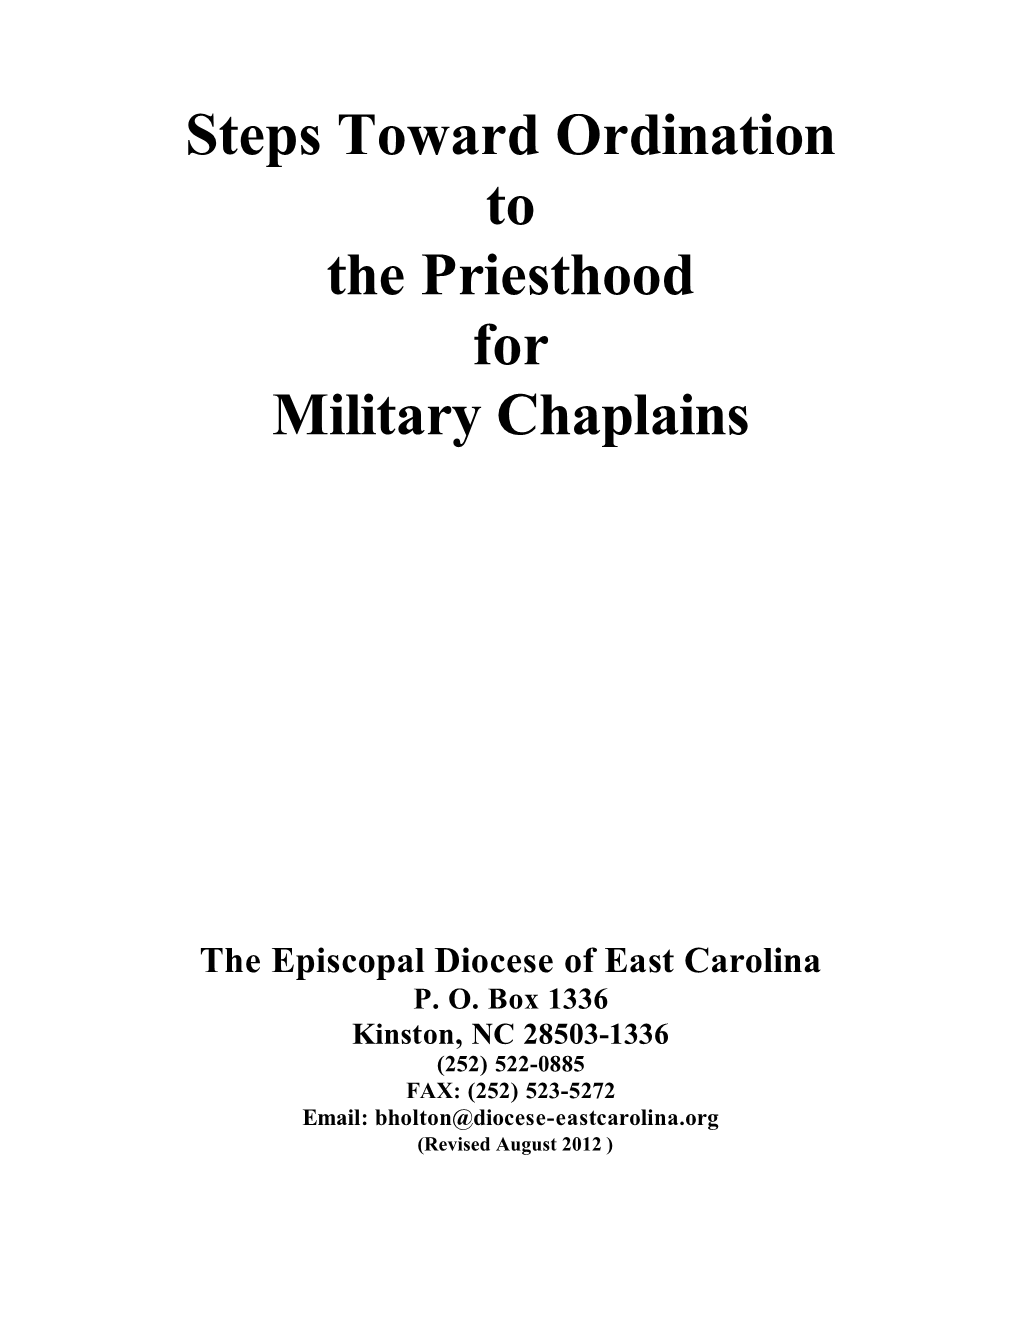 Steps Toward Ordination to the Priesthood for Military Chaplains